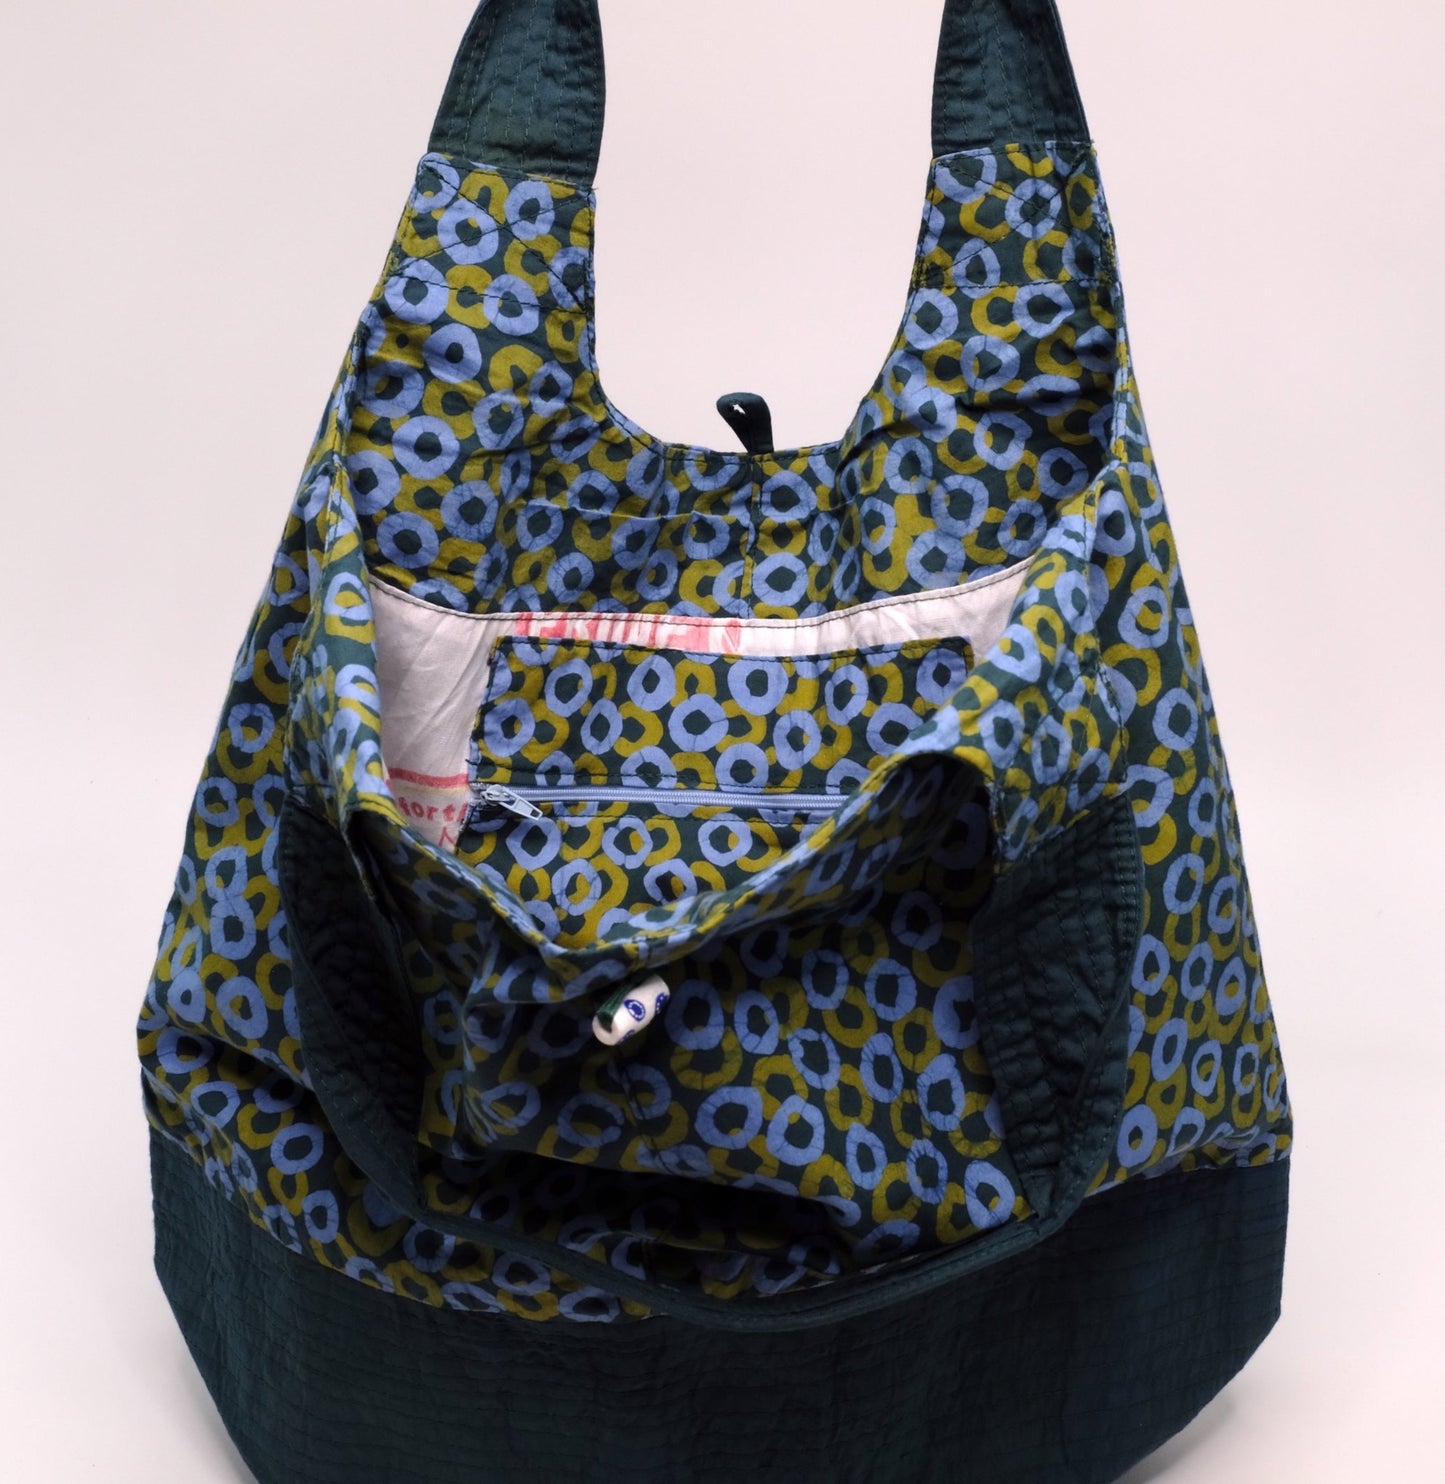 Bucket bag with a green ring pattern